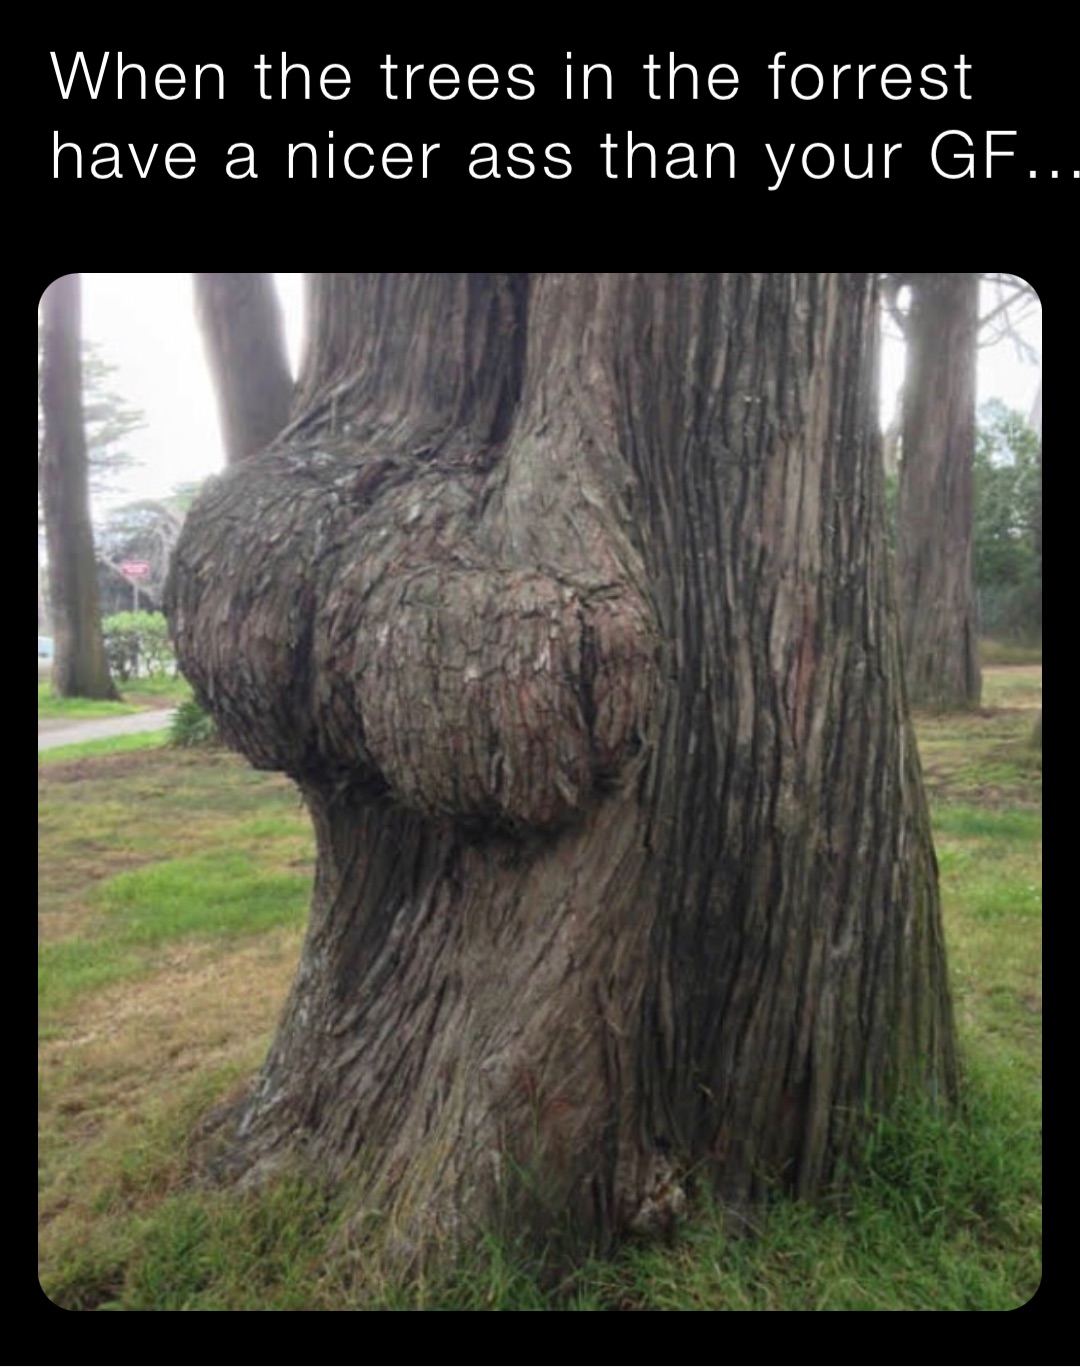 When the trees in the forrest have a nicer ass than your GF…..